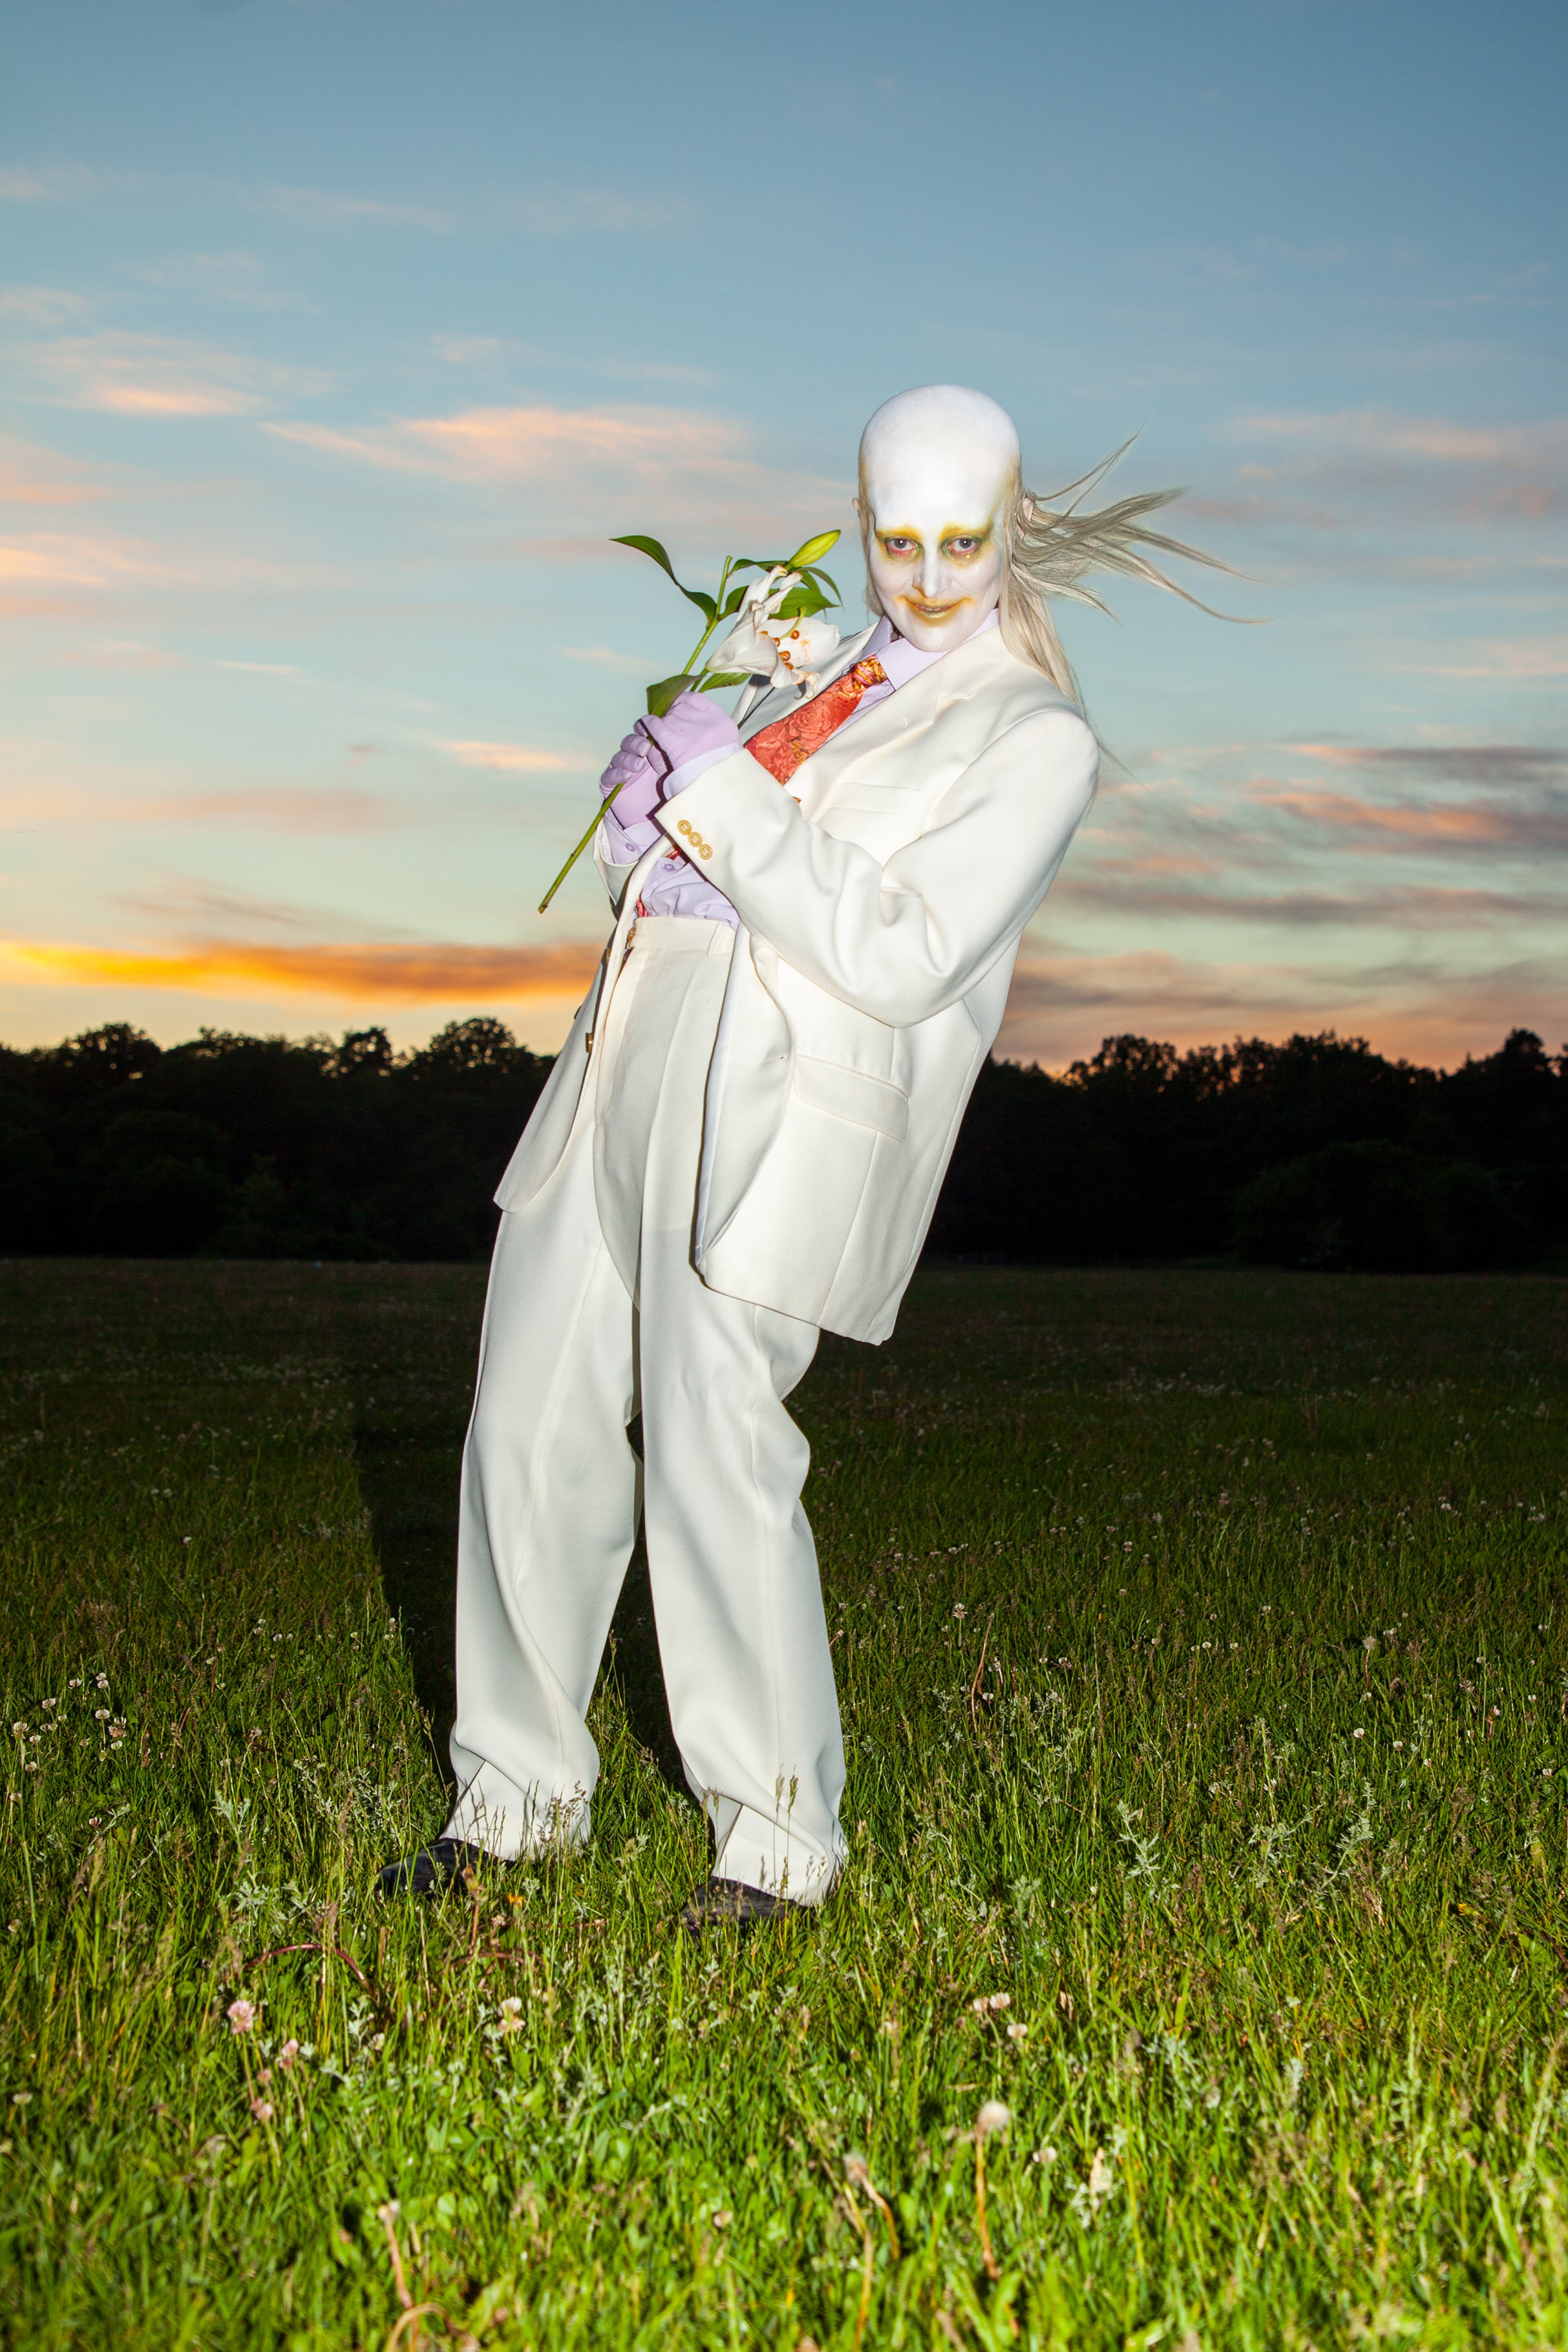 Fever Ray in Boston promo photo for Exclusive presale offer code